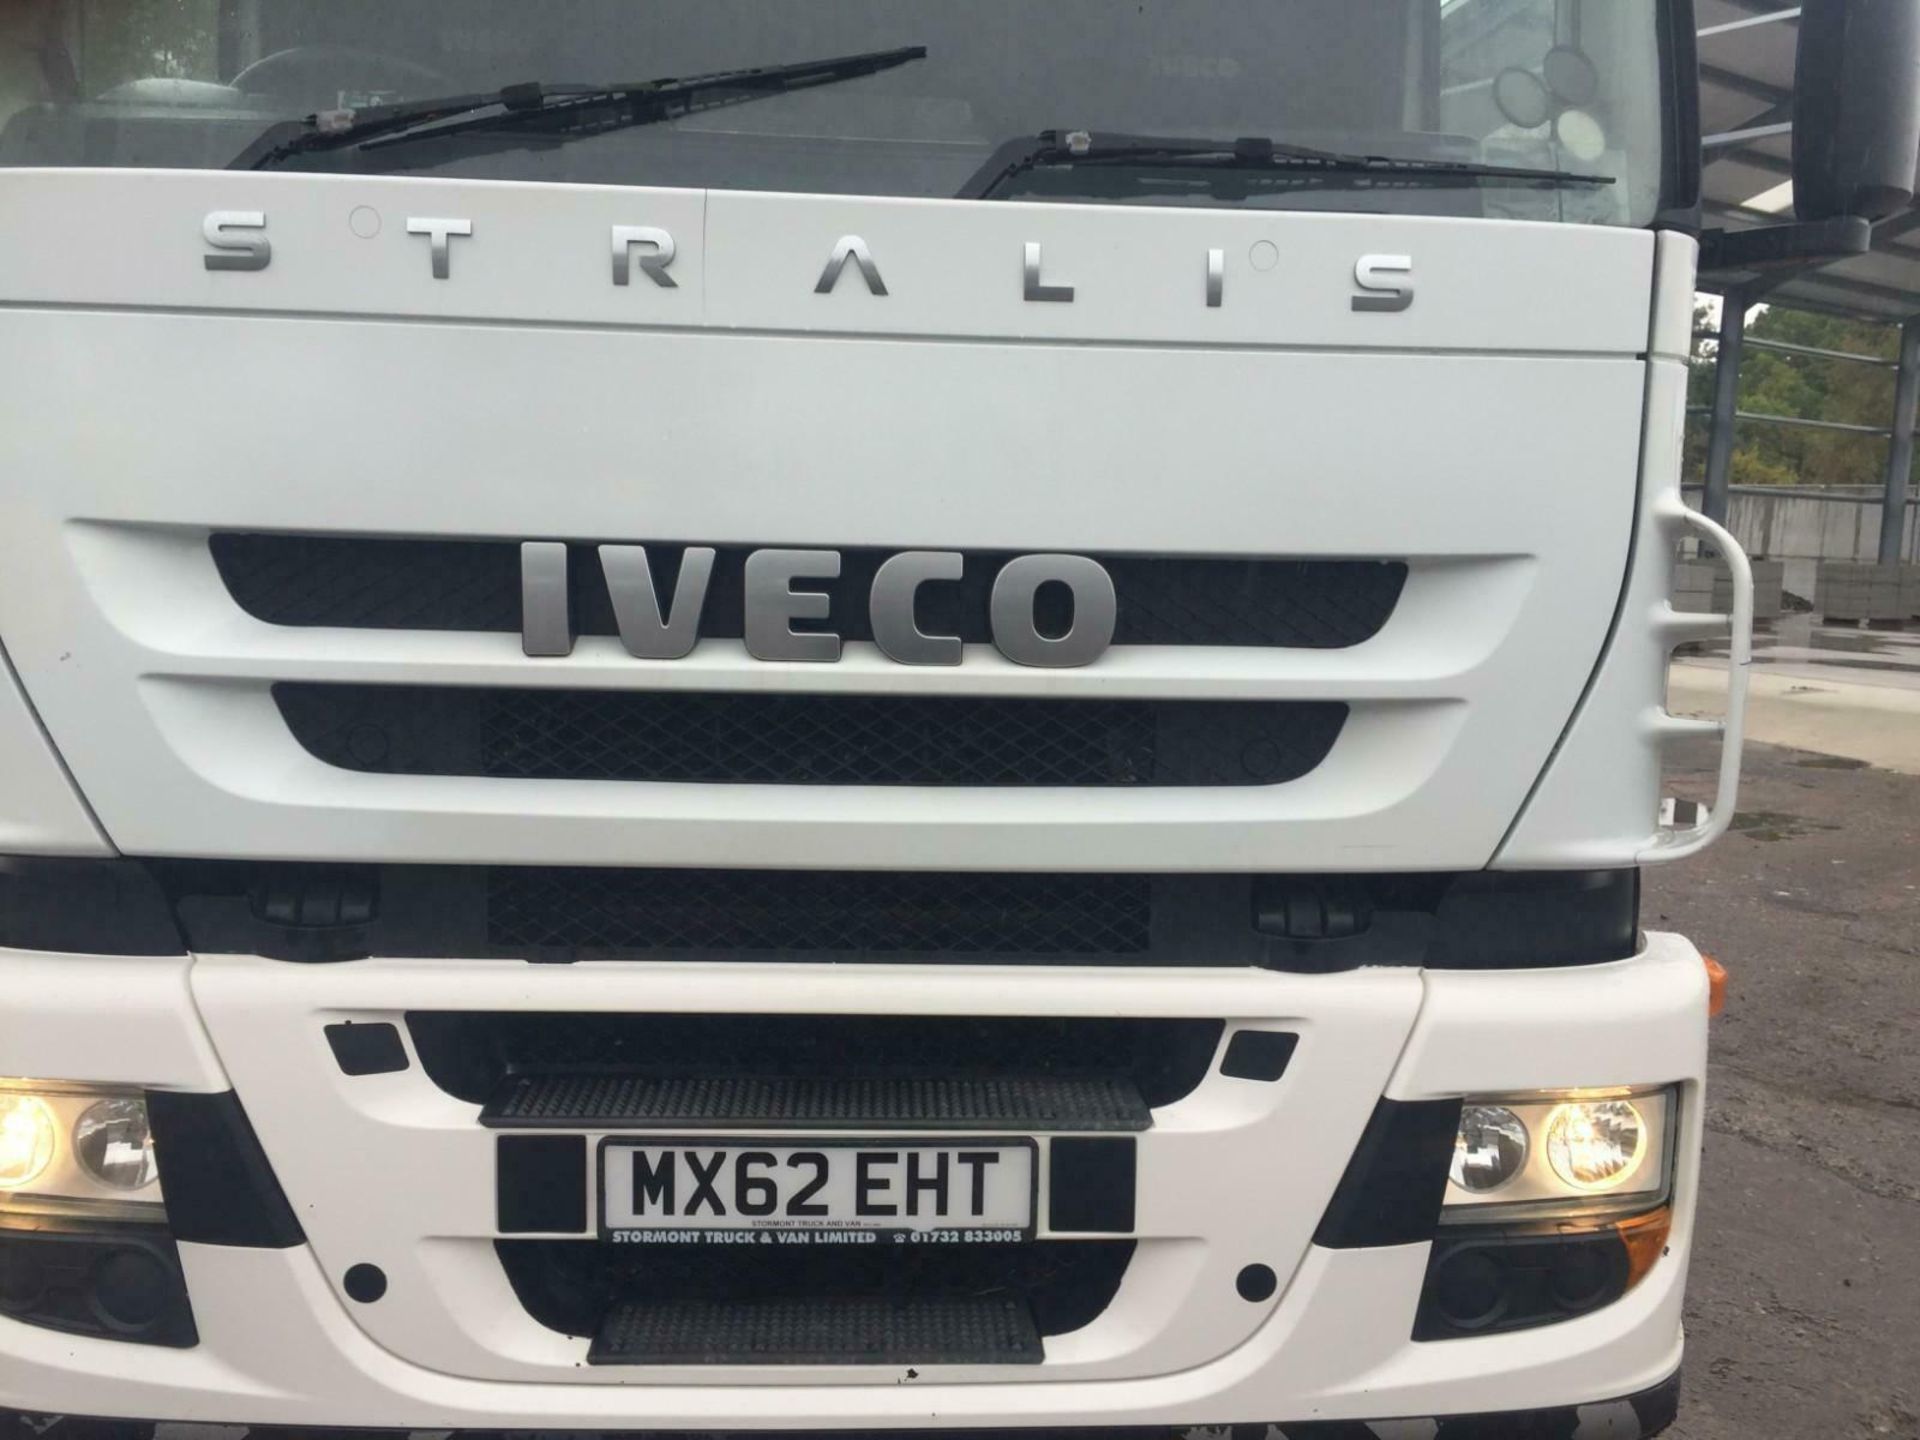 Iveco Stralis 2012 - Image 5 of 12